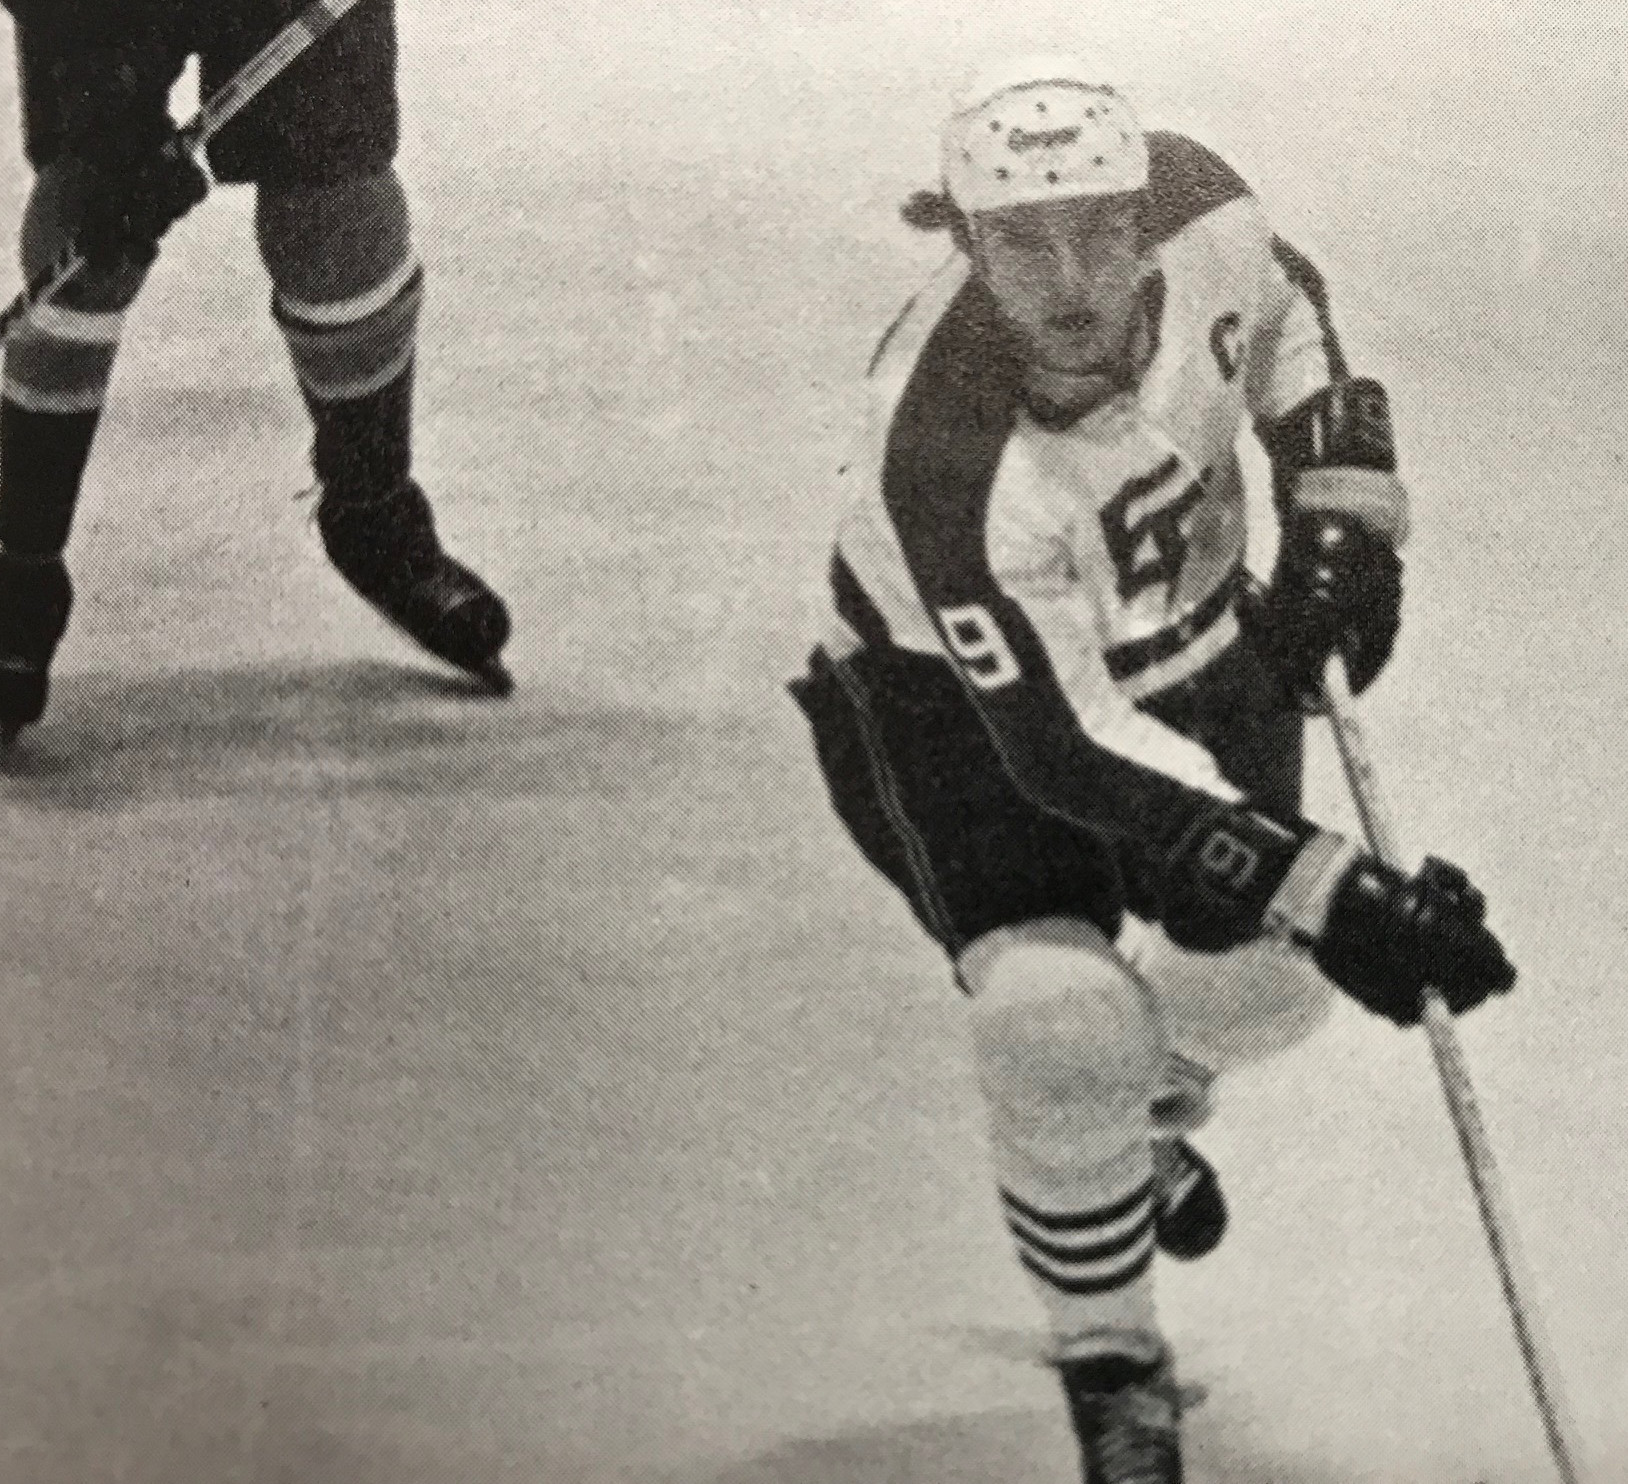 Ron Wilson shown skating for the Townies during his EPHS hockey days.